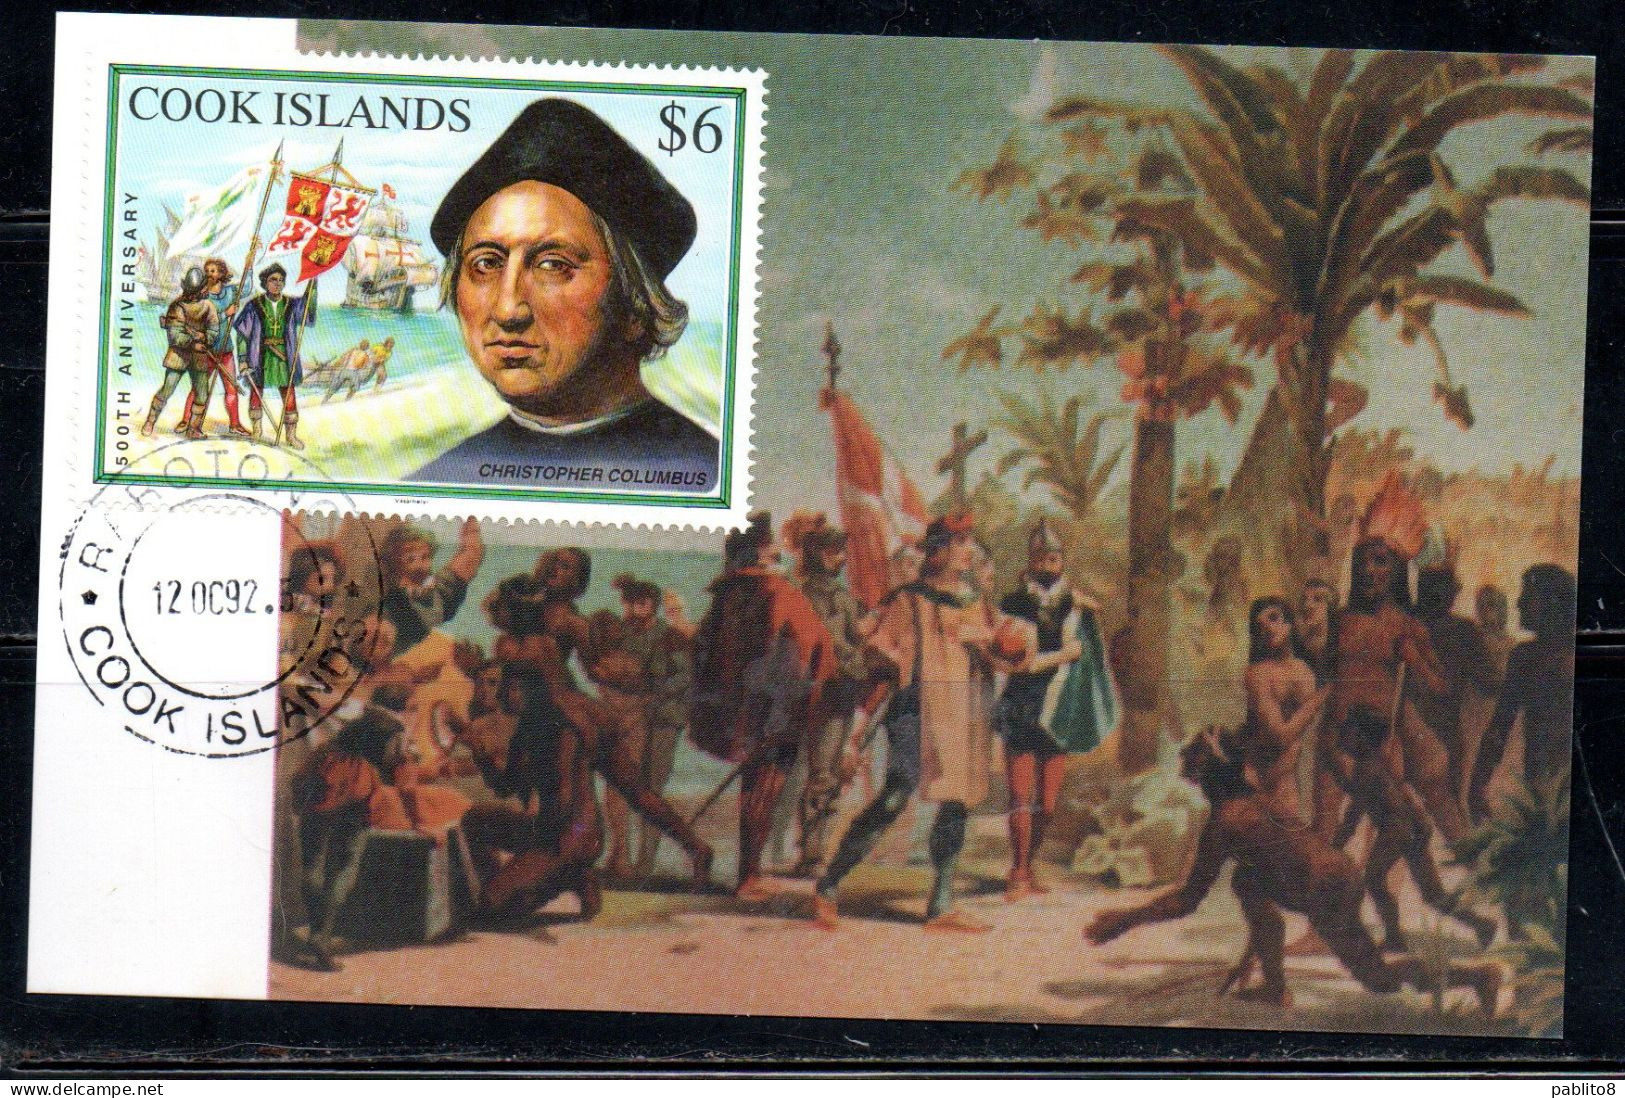 COOK ISLANDS ISOLE 1992 DISCOVERY OF AMERICA COLUMBUS CRISTOFORO COLOMBO 6$ MAXI MAXIMUM CARD - Cookinseln